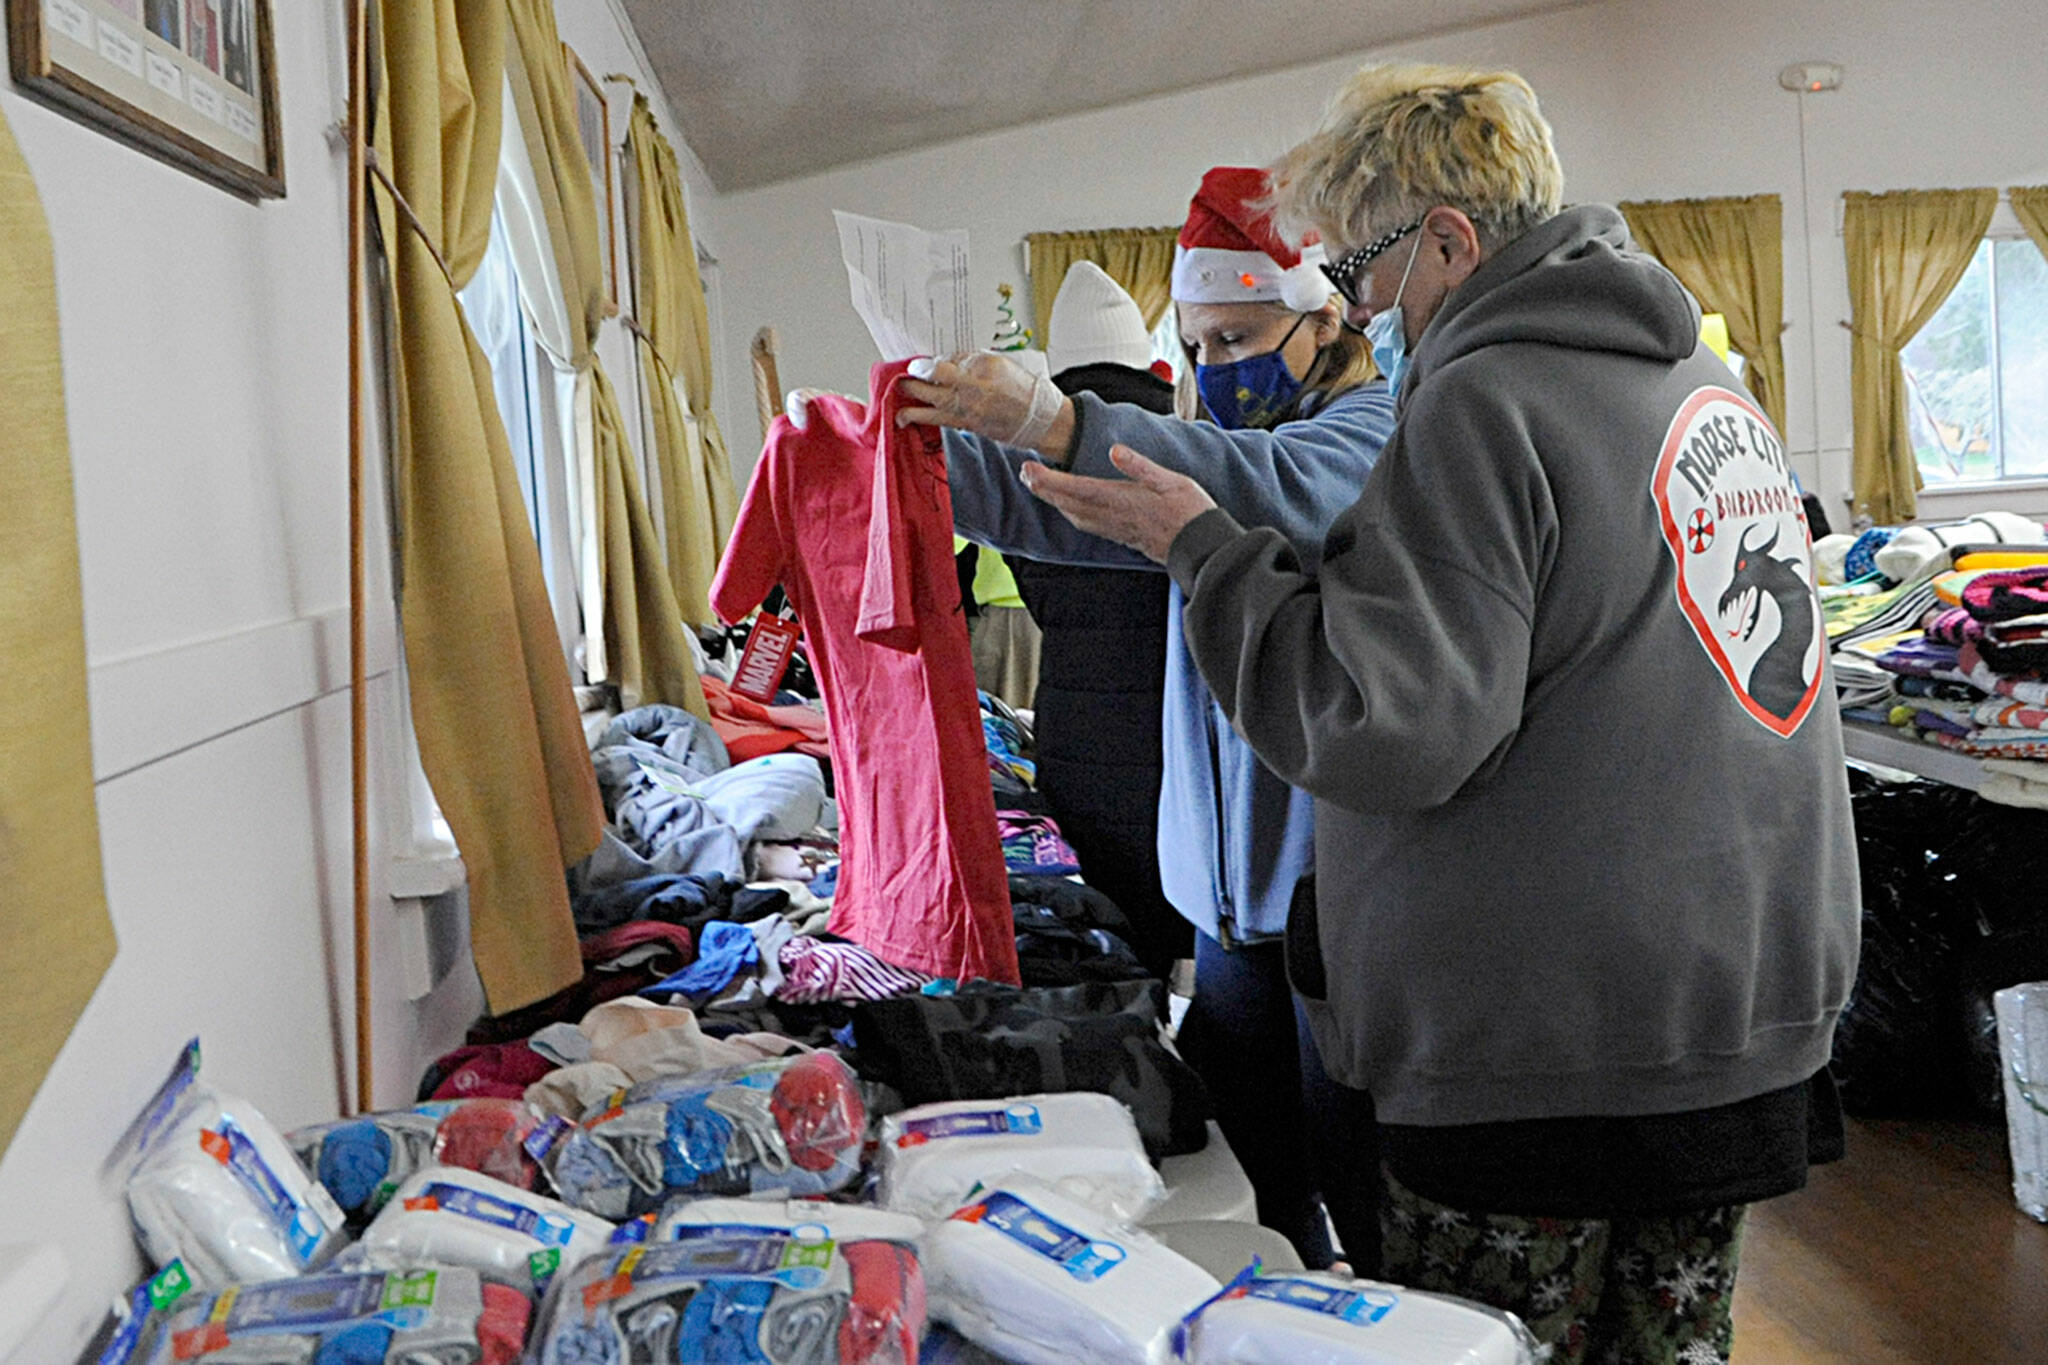 Kathy Joyner, co-organizer of Toys for Sequim Kids, helps Jean Ann Houk size up a t-shirt for one of her children this Christmas. Sequim Gazette photo by Matthew Nash